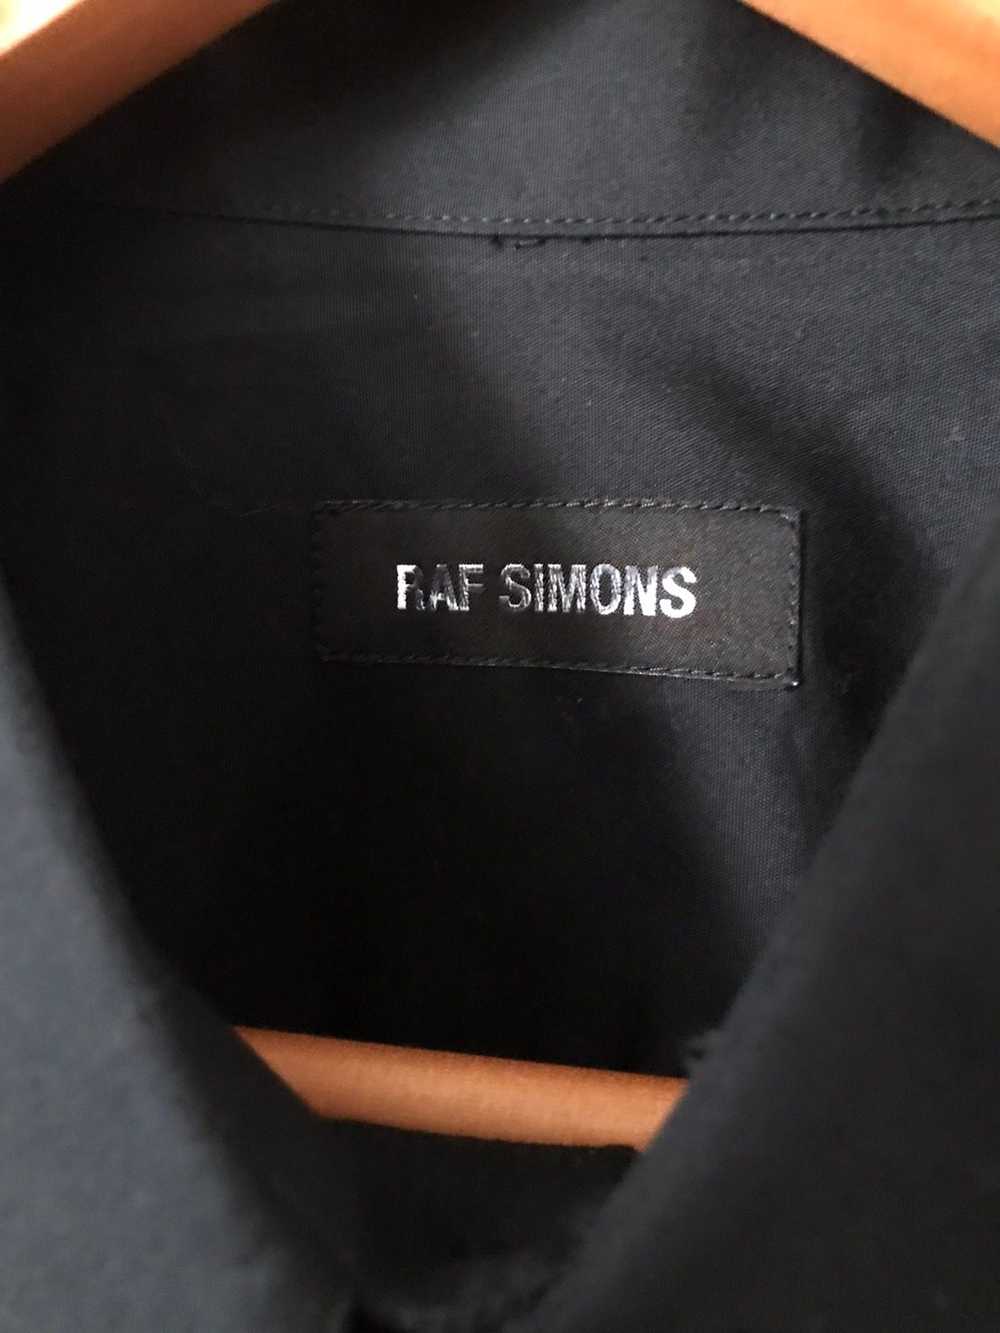 Raf Simons SS19 “Clubbers” Oversized Button Up - image 8